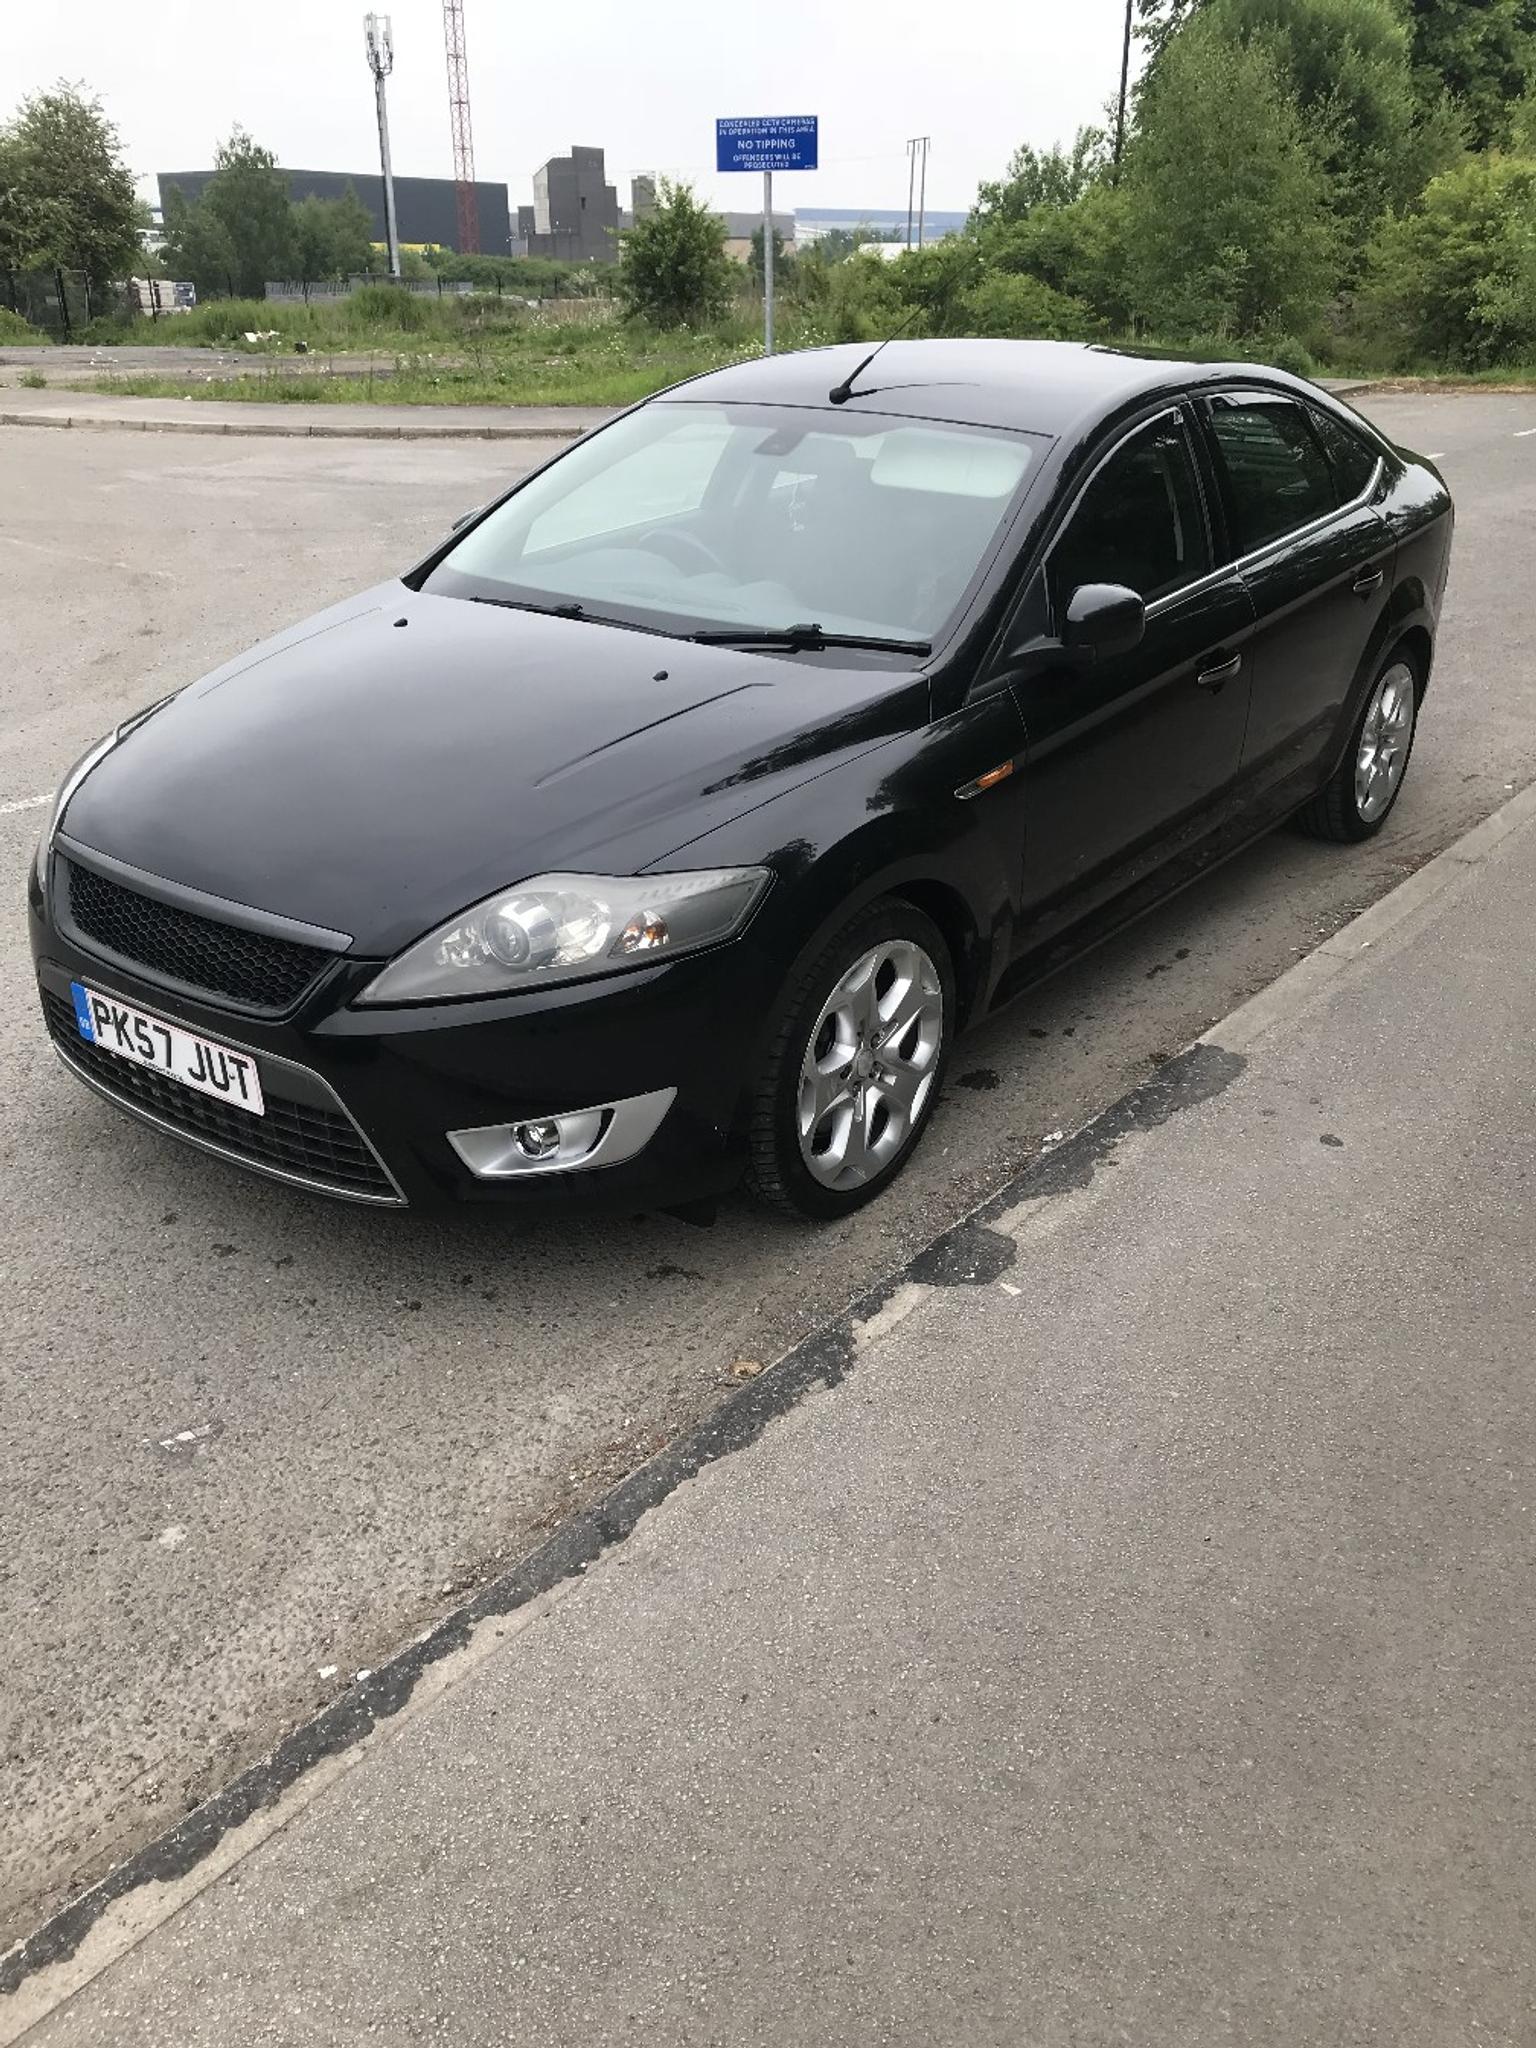 Ford Mondeo Mk4 2 0 Tdci In Barnsley For 1 800 00 For Sale Shpock